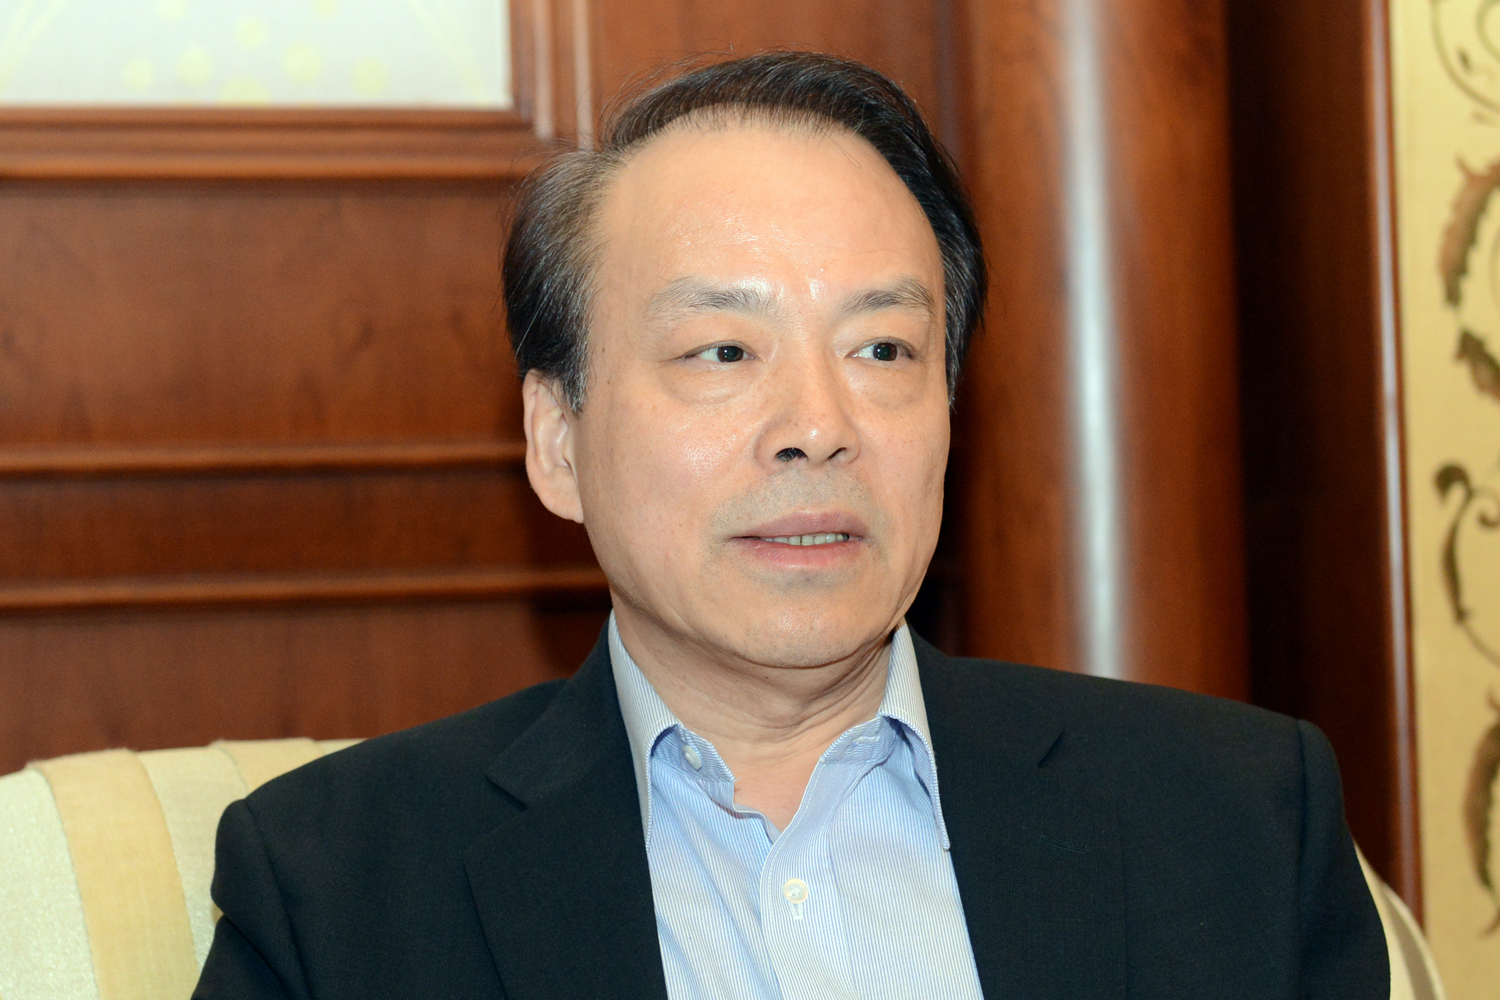 Chinese News Agency Xinhua Editor in Chief He Ping